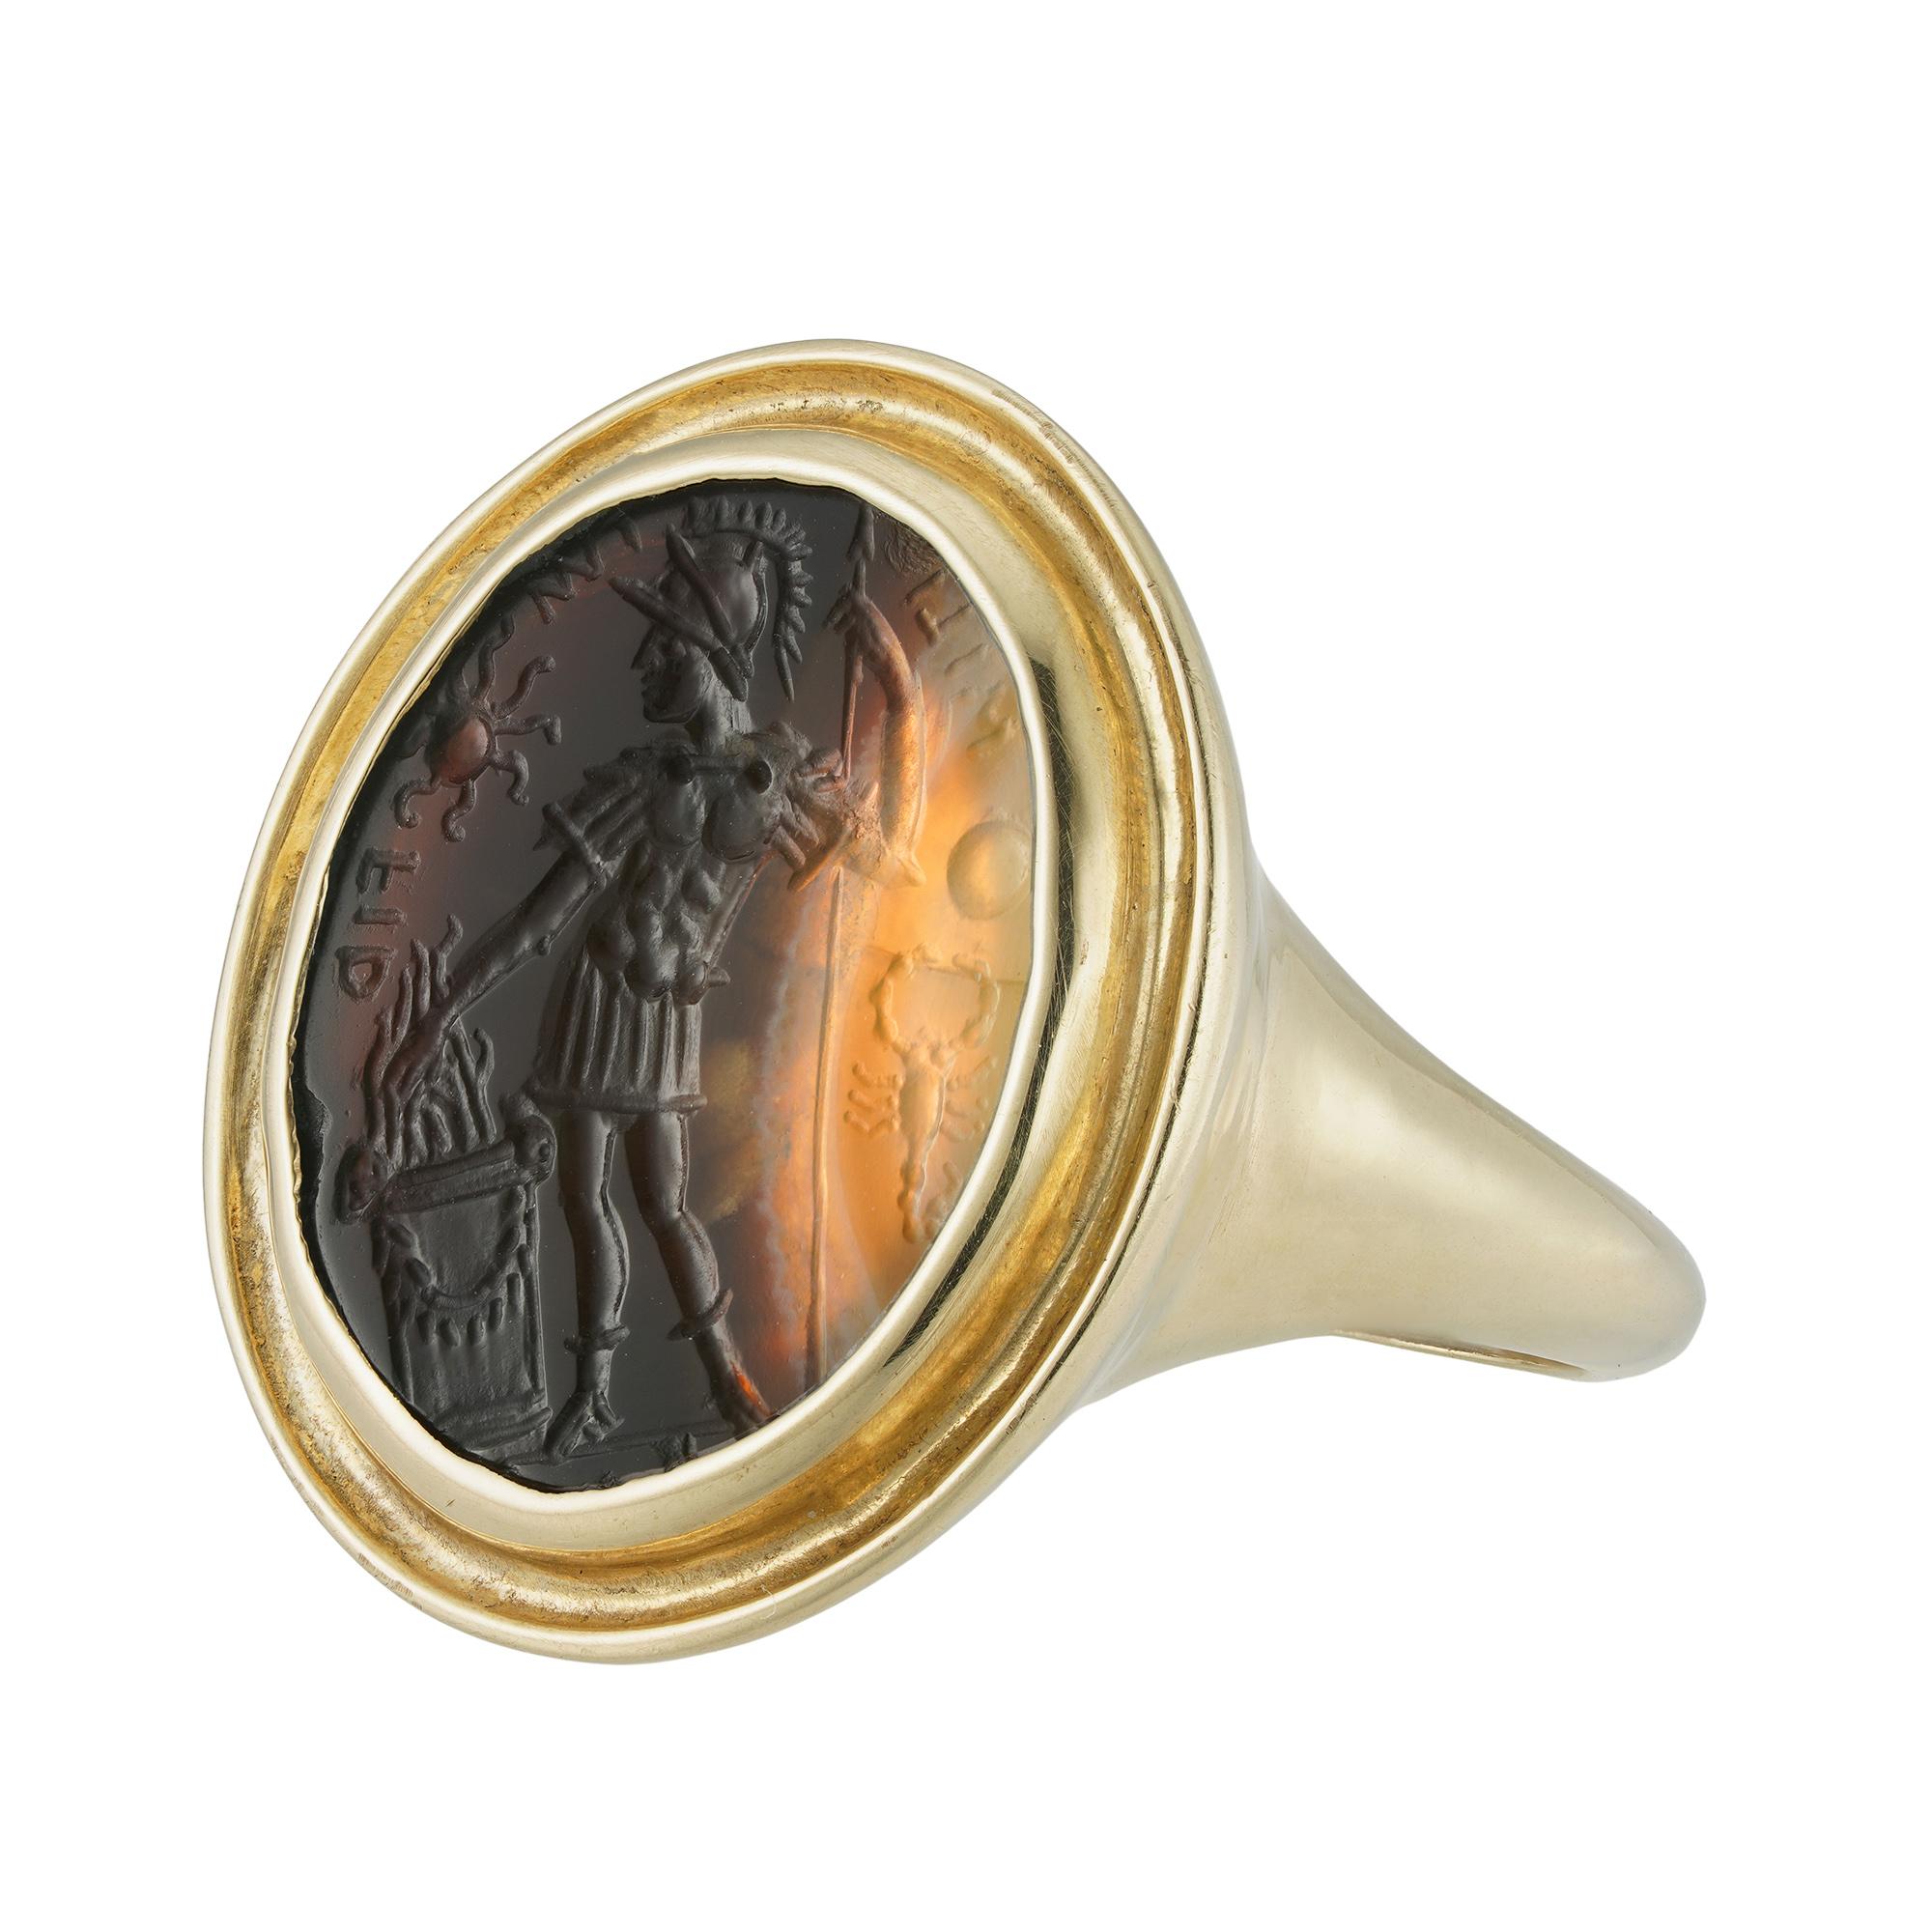 A 16th century Italian agate intaglio depicting Gaius Mucius Scaevola, the oval shaped agate measuring approximately 1.9 x 1.6cm, depicting Scaevola on a standing position with his right hand into a fire, inscribed MILI IM FID and decorated with the